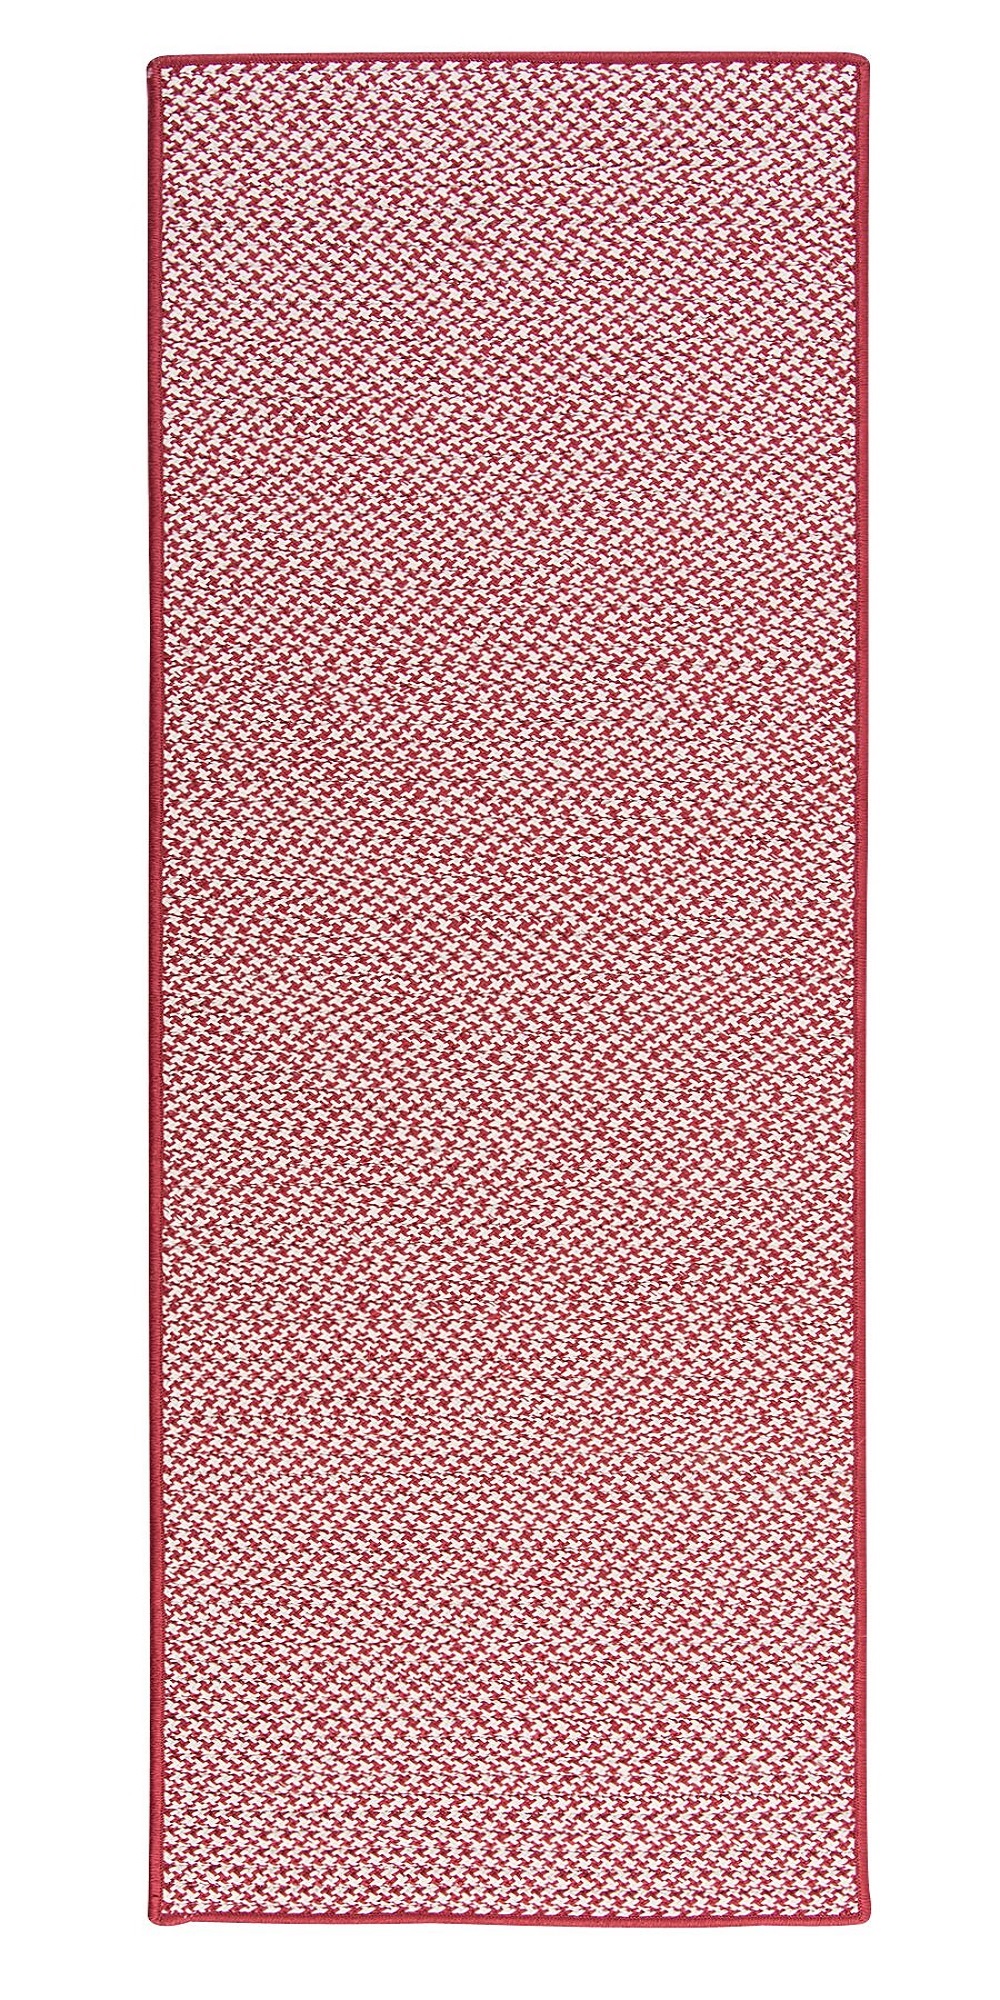 Colonial Mills 2.5' x 7' Red and White Reversible Rectangular Handcrafted Runner Rug